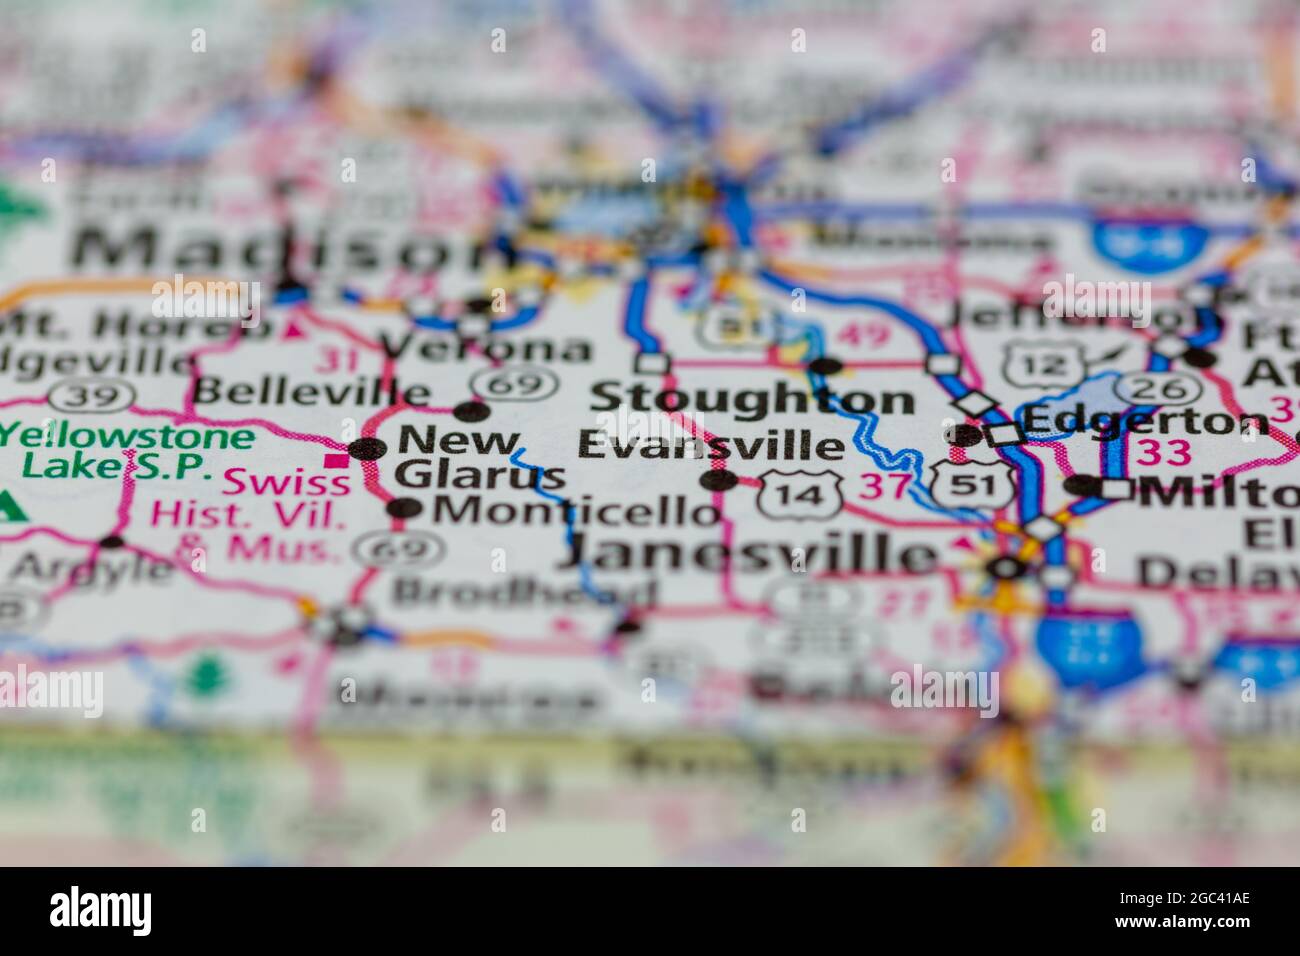 Evansville Wisconsin USA shown on a road map or Geography map Stock Photo